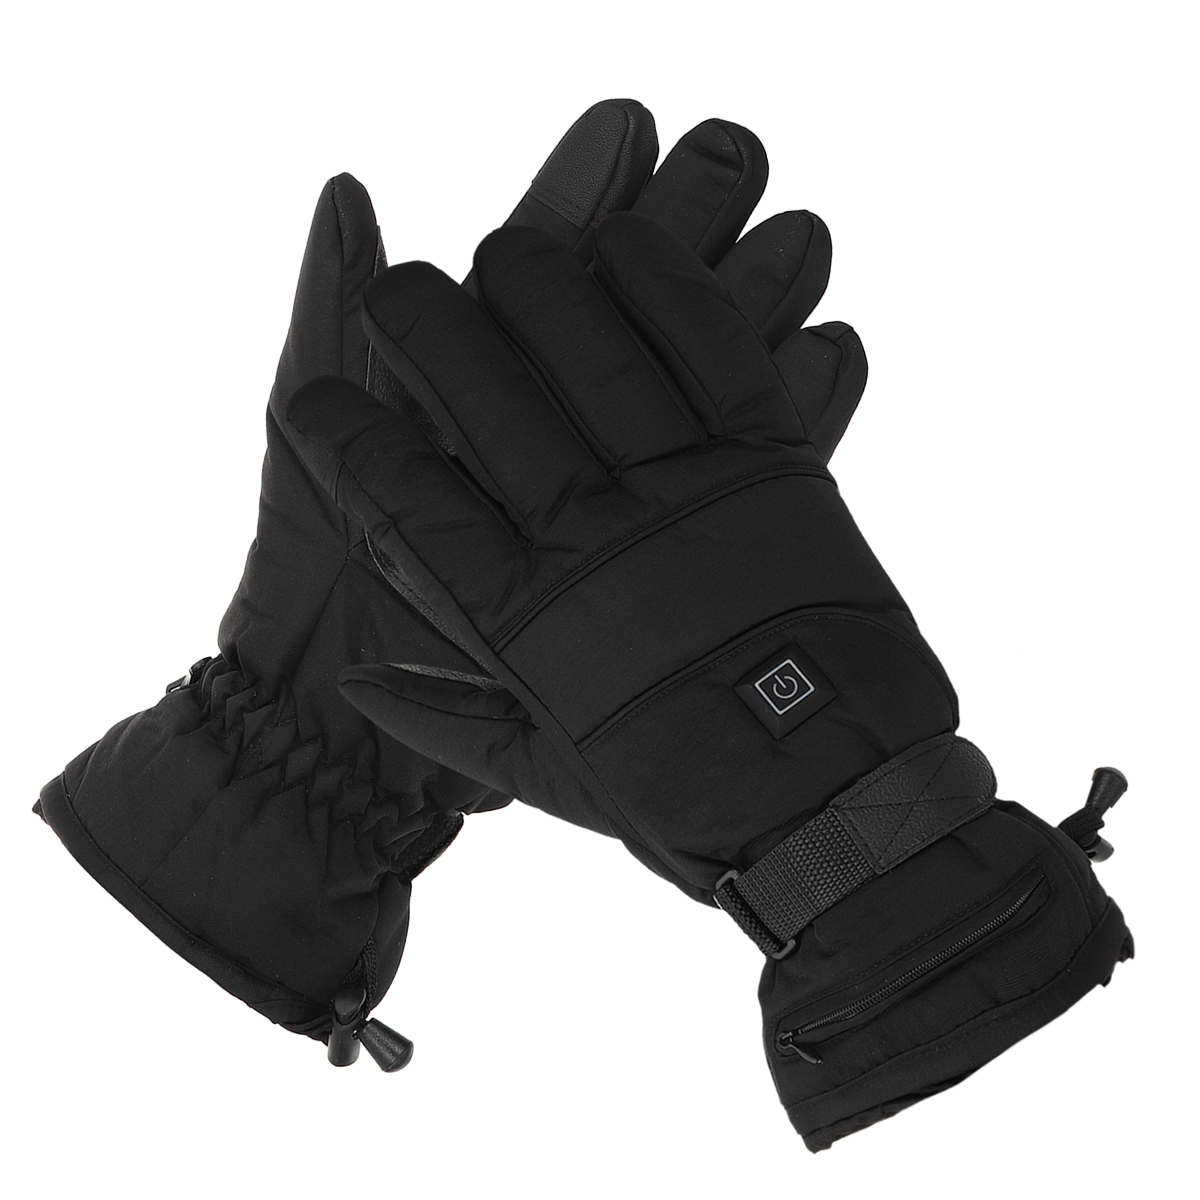 1-Pair-Electric-Heated-Hand-Gloves-3-Modes-Touchscreen-Motorbike-Motorcycle-Winter-Warm-Heated-Batte-1756429-8